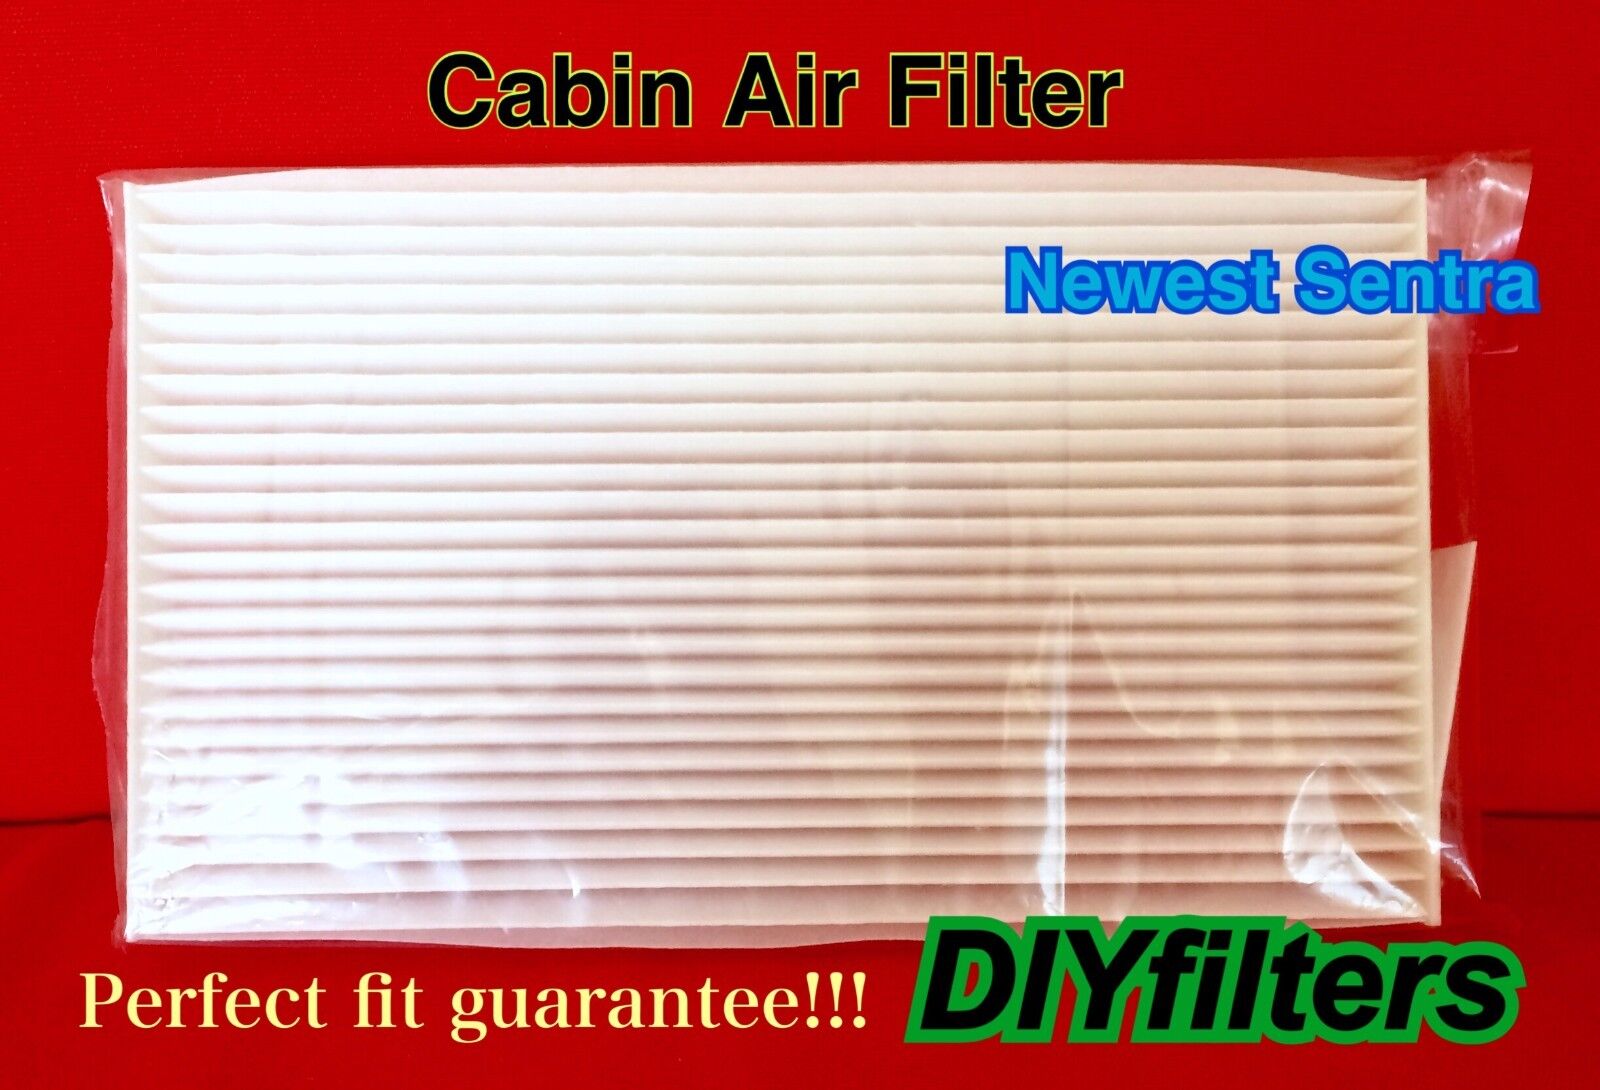 Non-Carbon AC CABIN AIR FILTER for Nissan Sentra Cube Juke Leaf 27891-3DF0A 